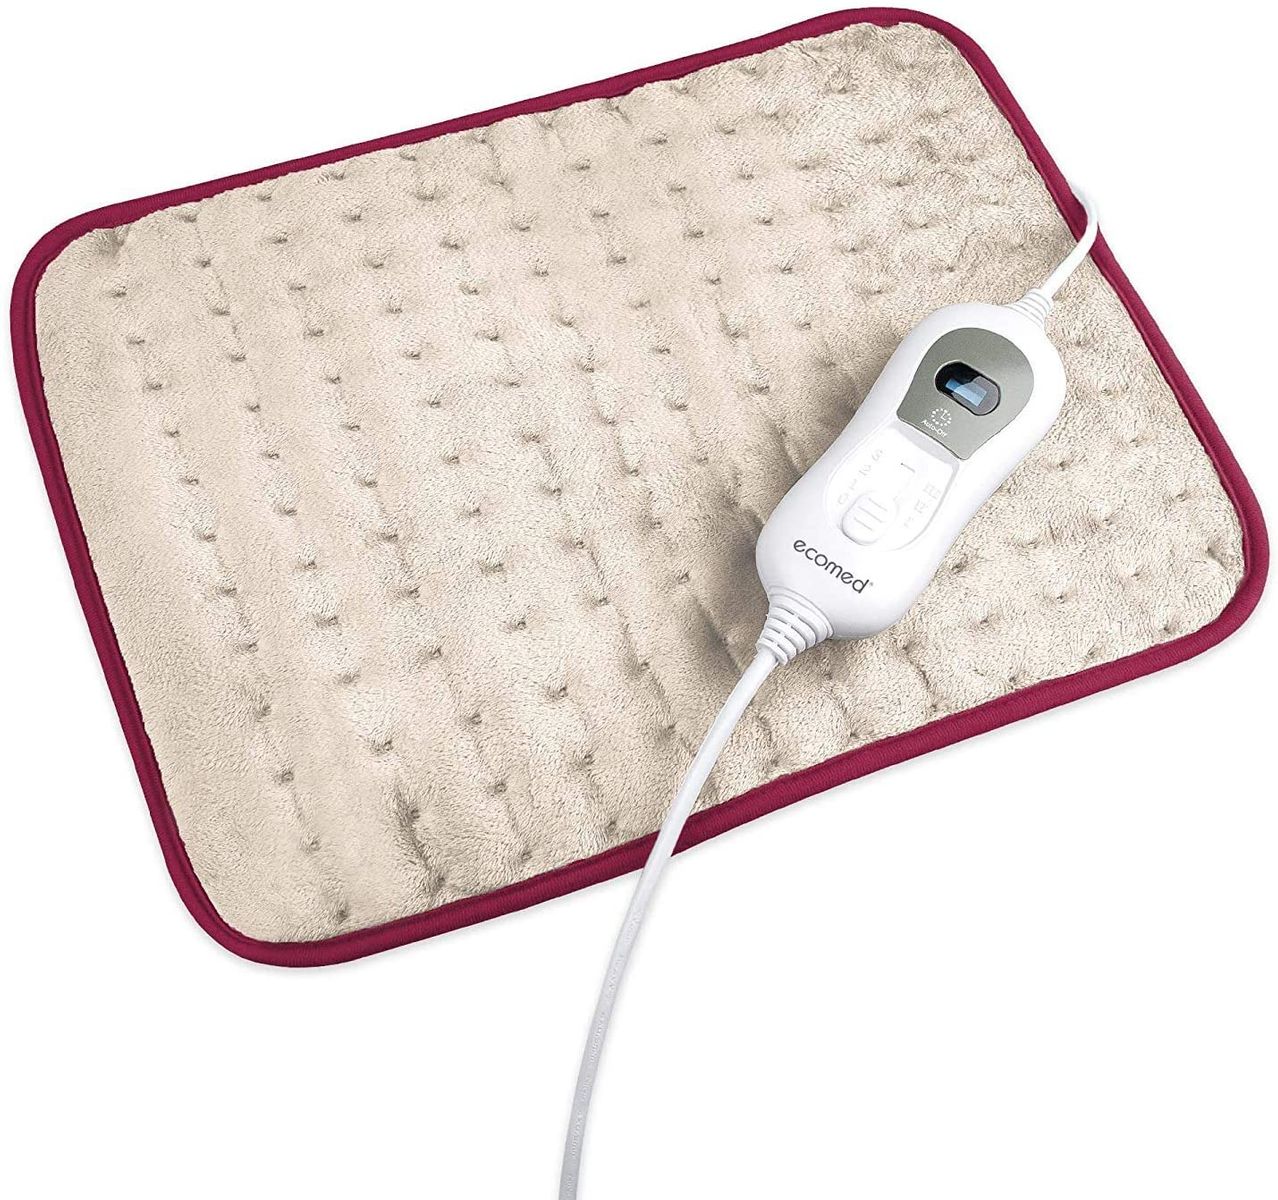 Ecomed HP-40E heating pad, super fluffy, heat pad with 3 temperature levels, overheating protection, automatic shut-off, washable, for back, neck, shoulder 2nd generation.